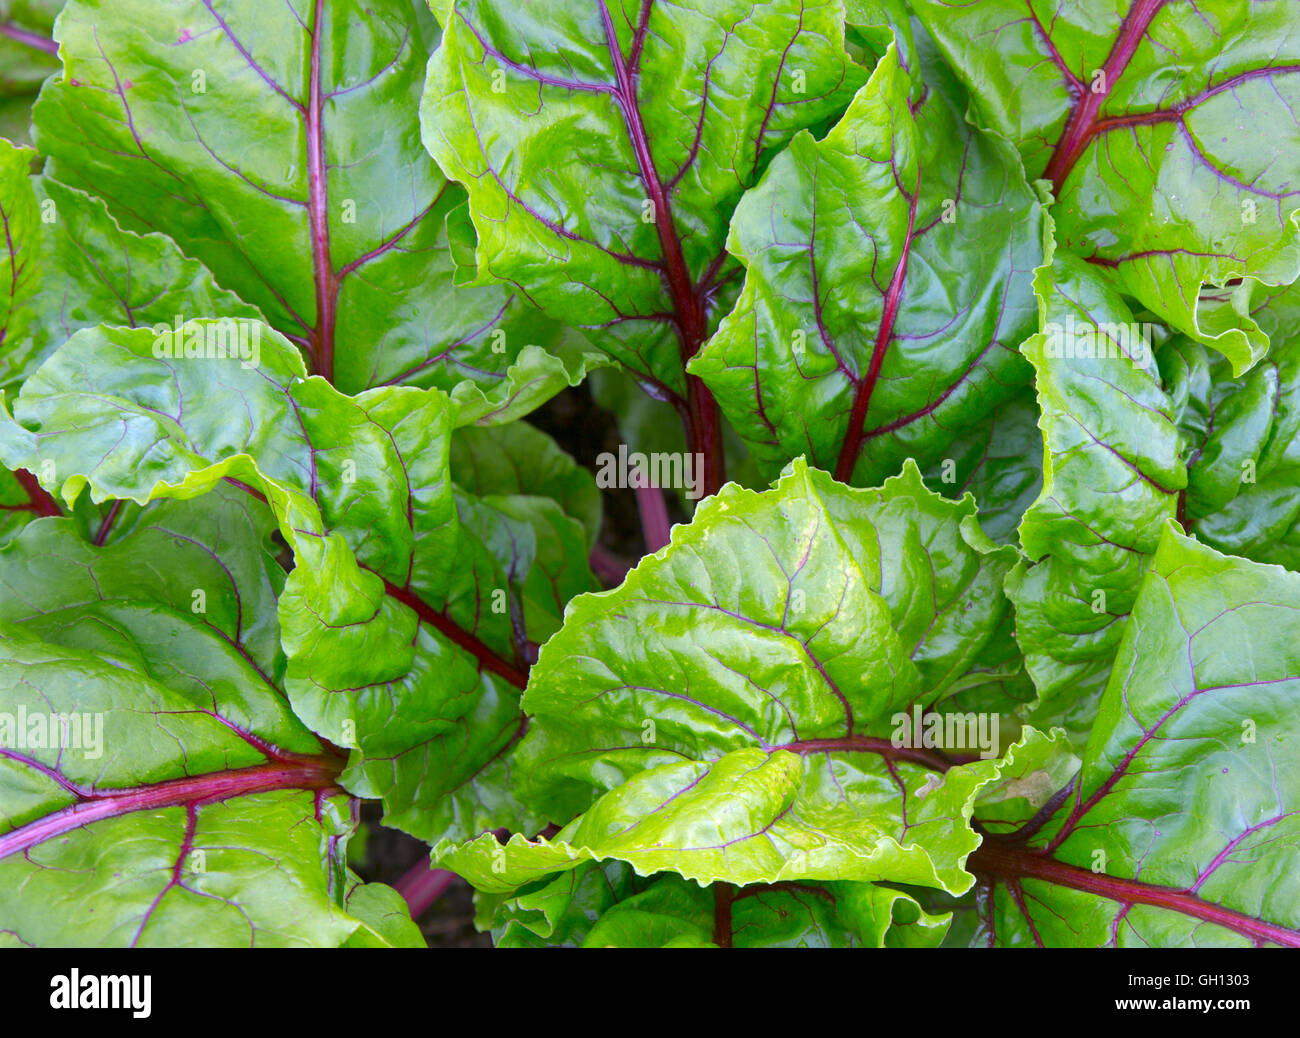 Beetroot 'Boltardy' leaves often used in salads Stock Photo